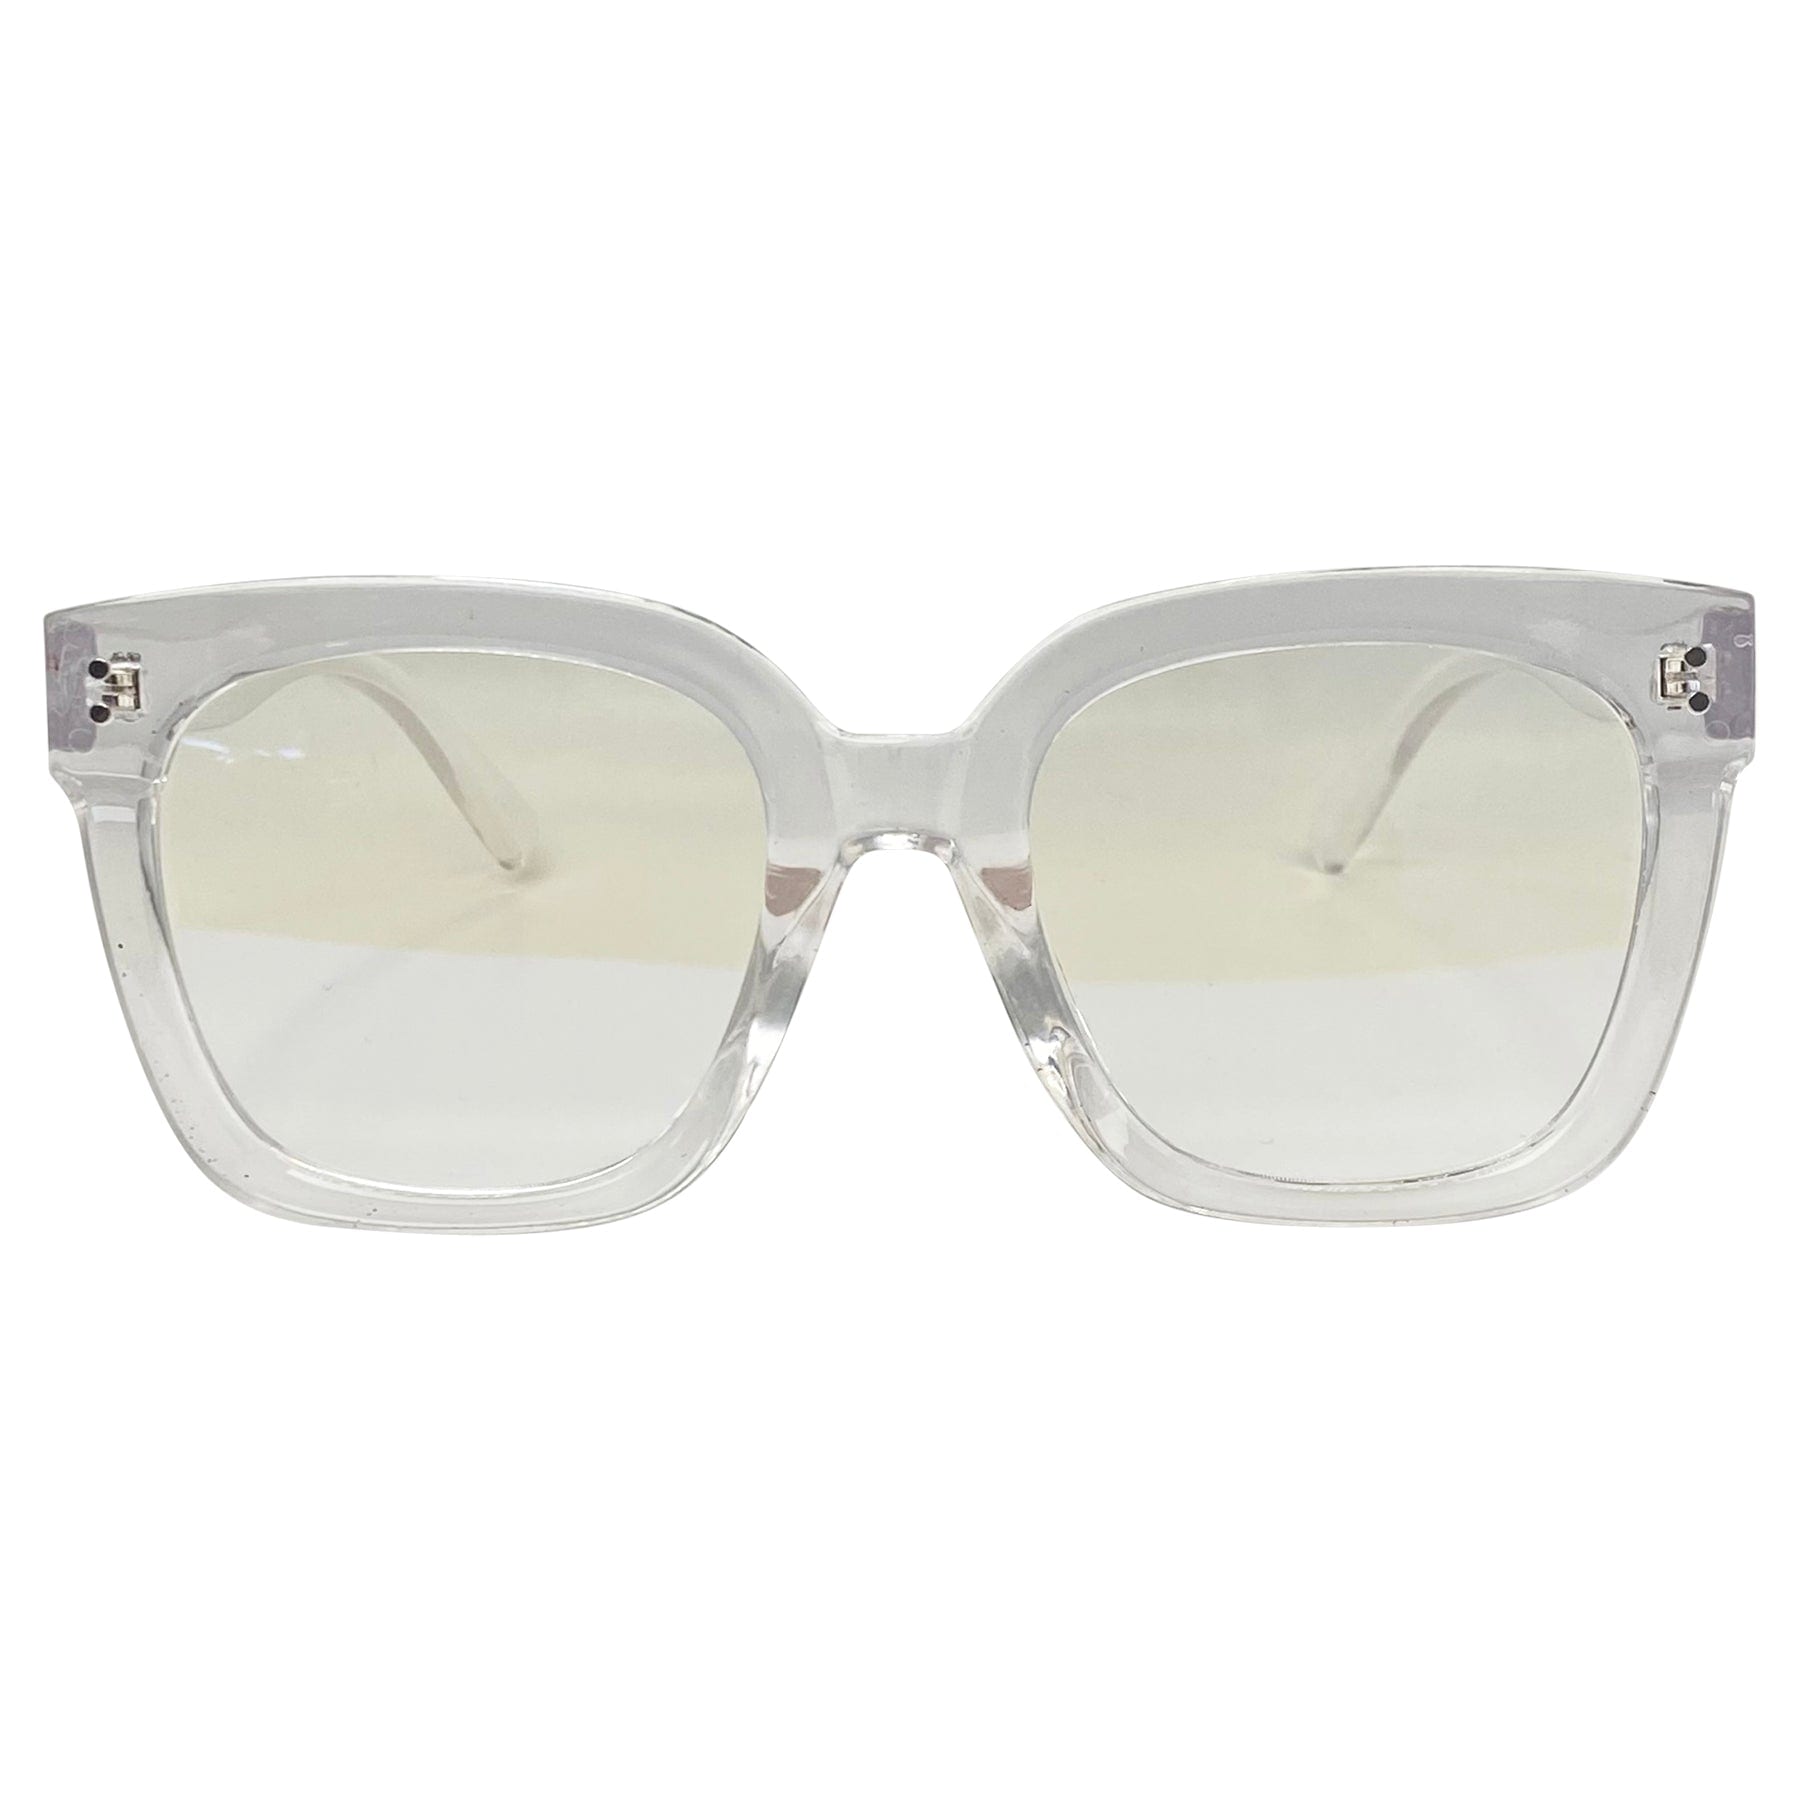 retro inspired glasses with a crystal clear chunky frame and blueblocker clear lens